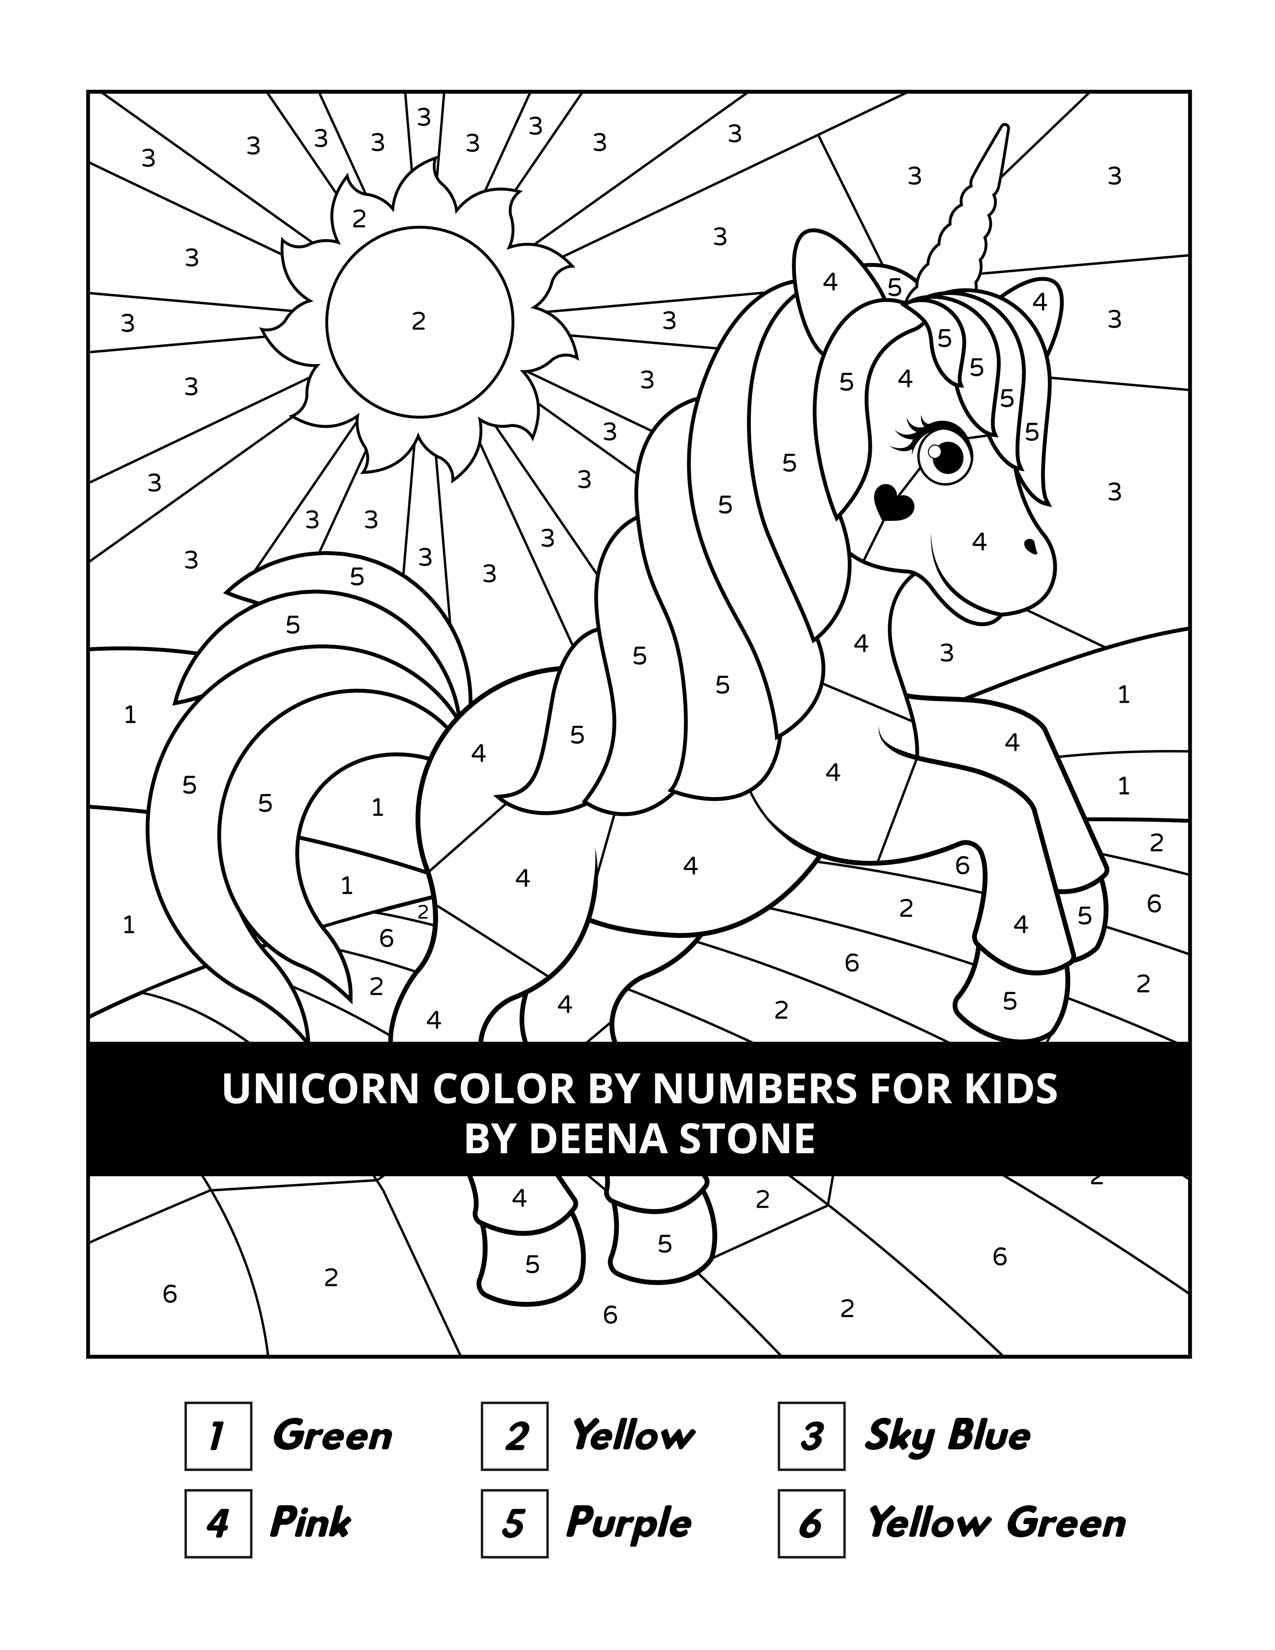 Unicorn Color By Numbers For Kids Deena Stone